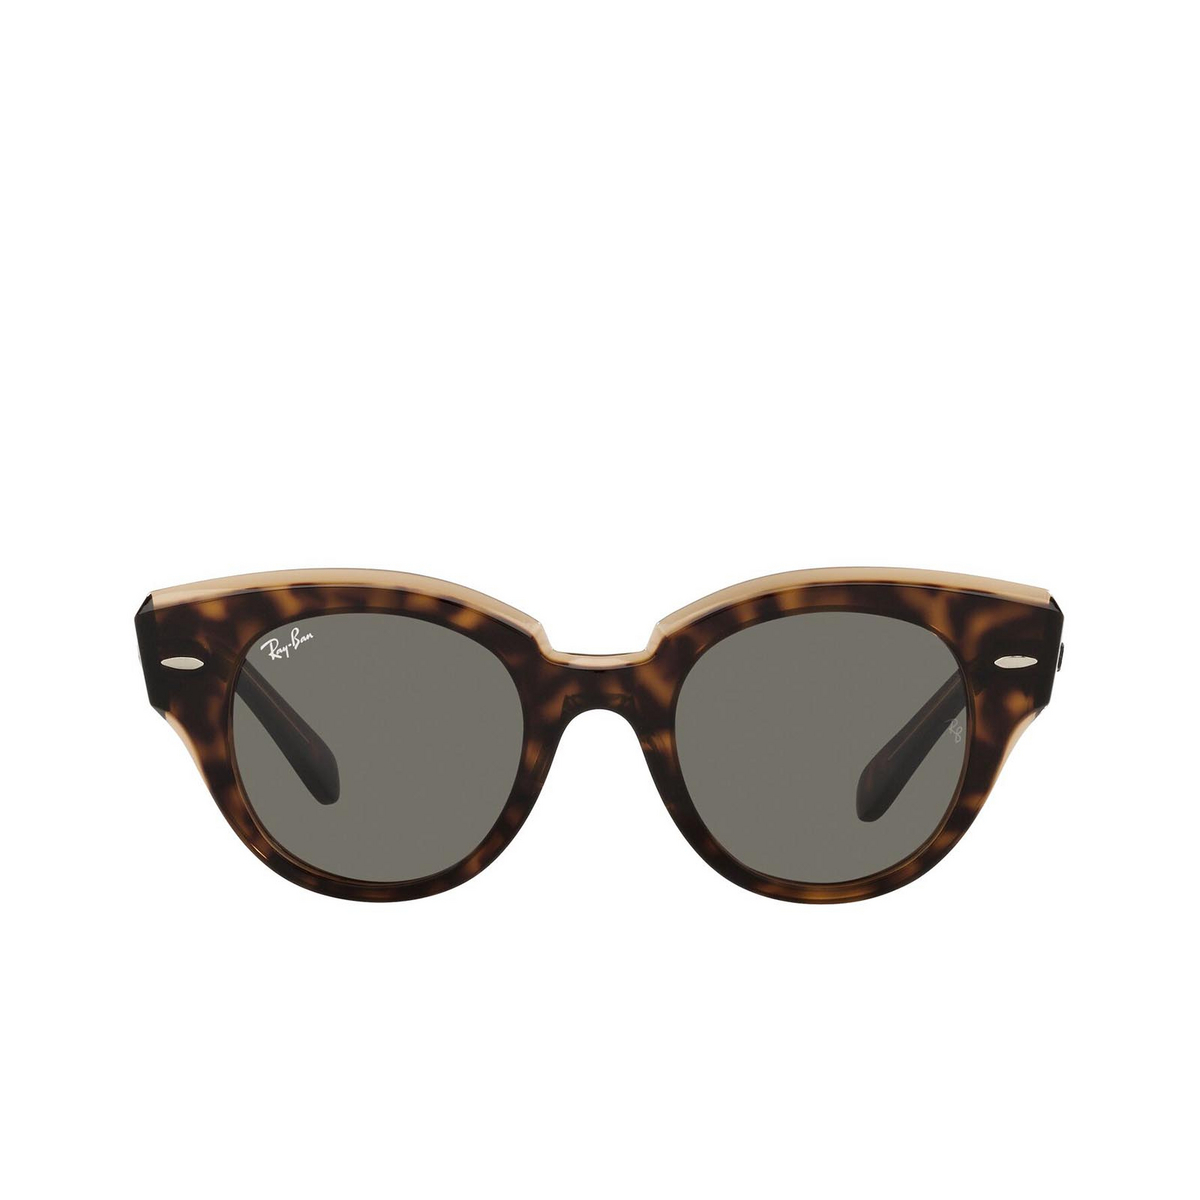 Ray-Ban ROUNDABOUT Sunglasses 1292B1 Havana on Transparent Brown - front view